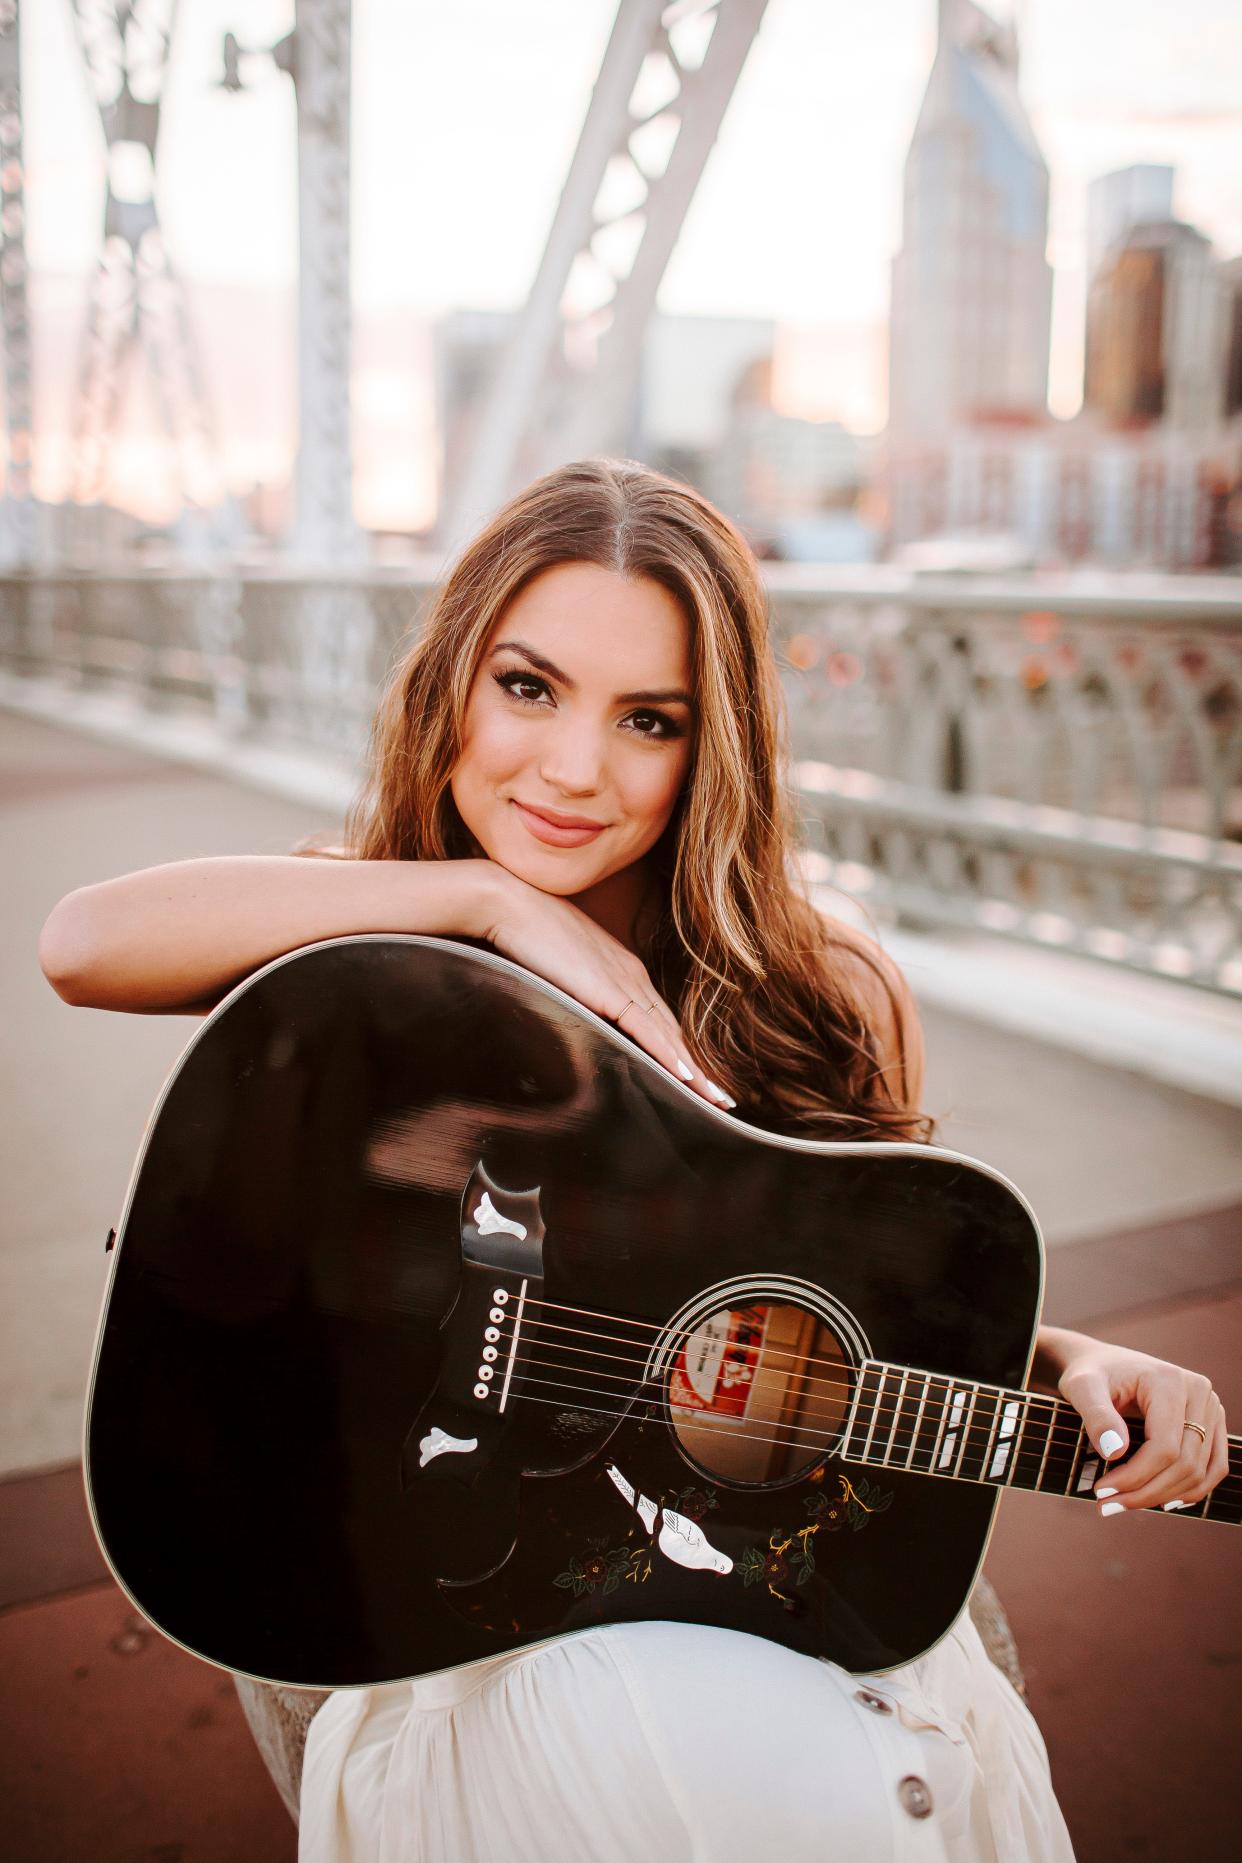 Stark County native and country music artist Lauren Mascitti will headline a free May 21 concert at Centennial Plaza in downtown Canton benefiting first responders. Mascitti, a registered nurse, will be celebrating the release of a new song at the concert, which features opening act Buck Naked Band.